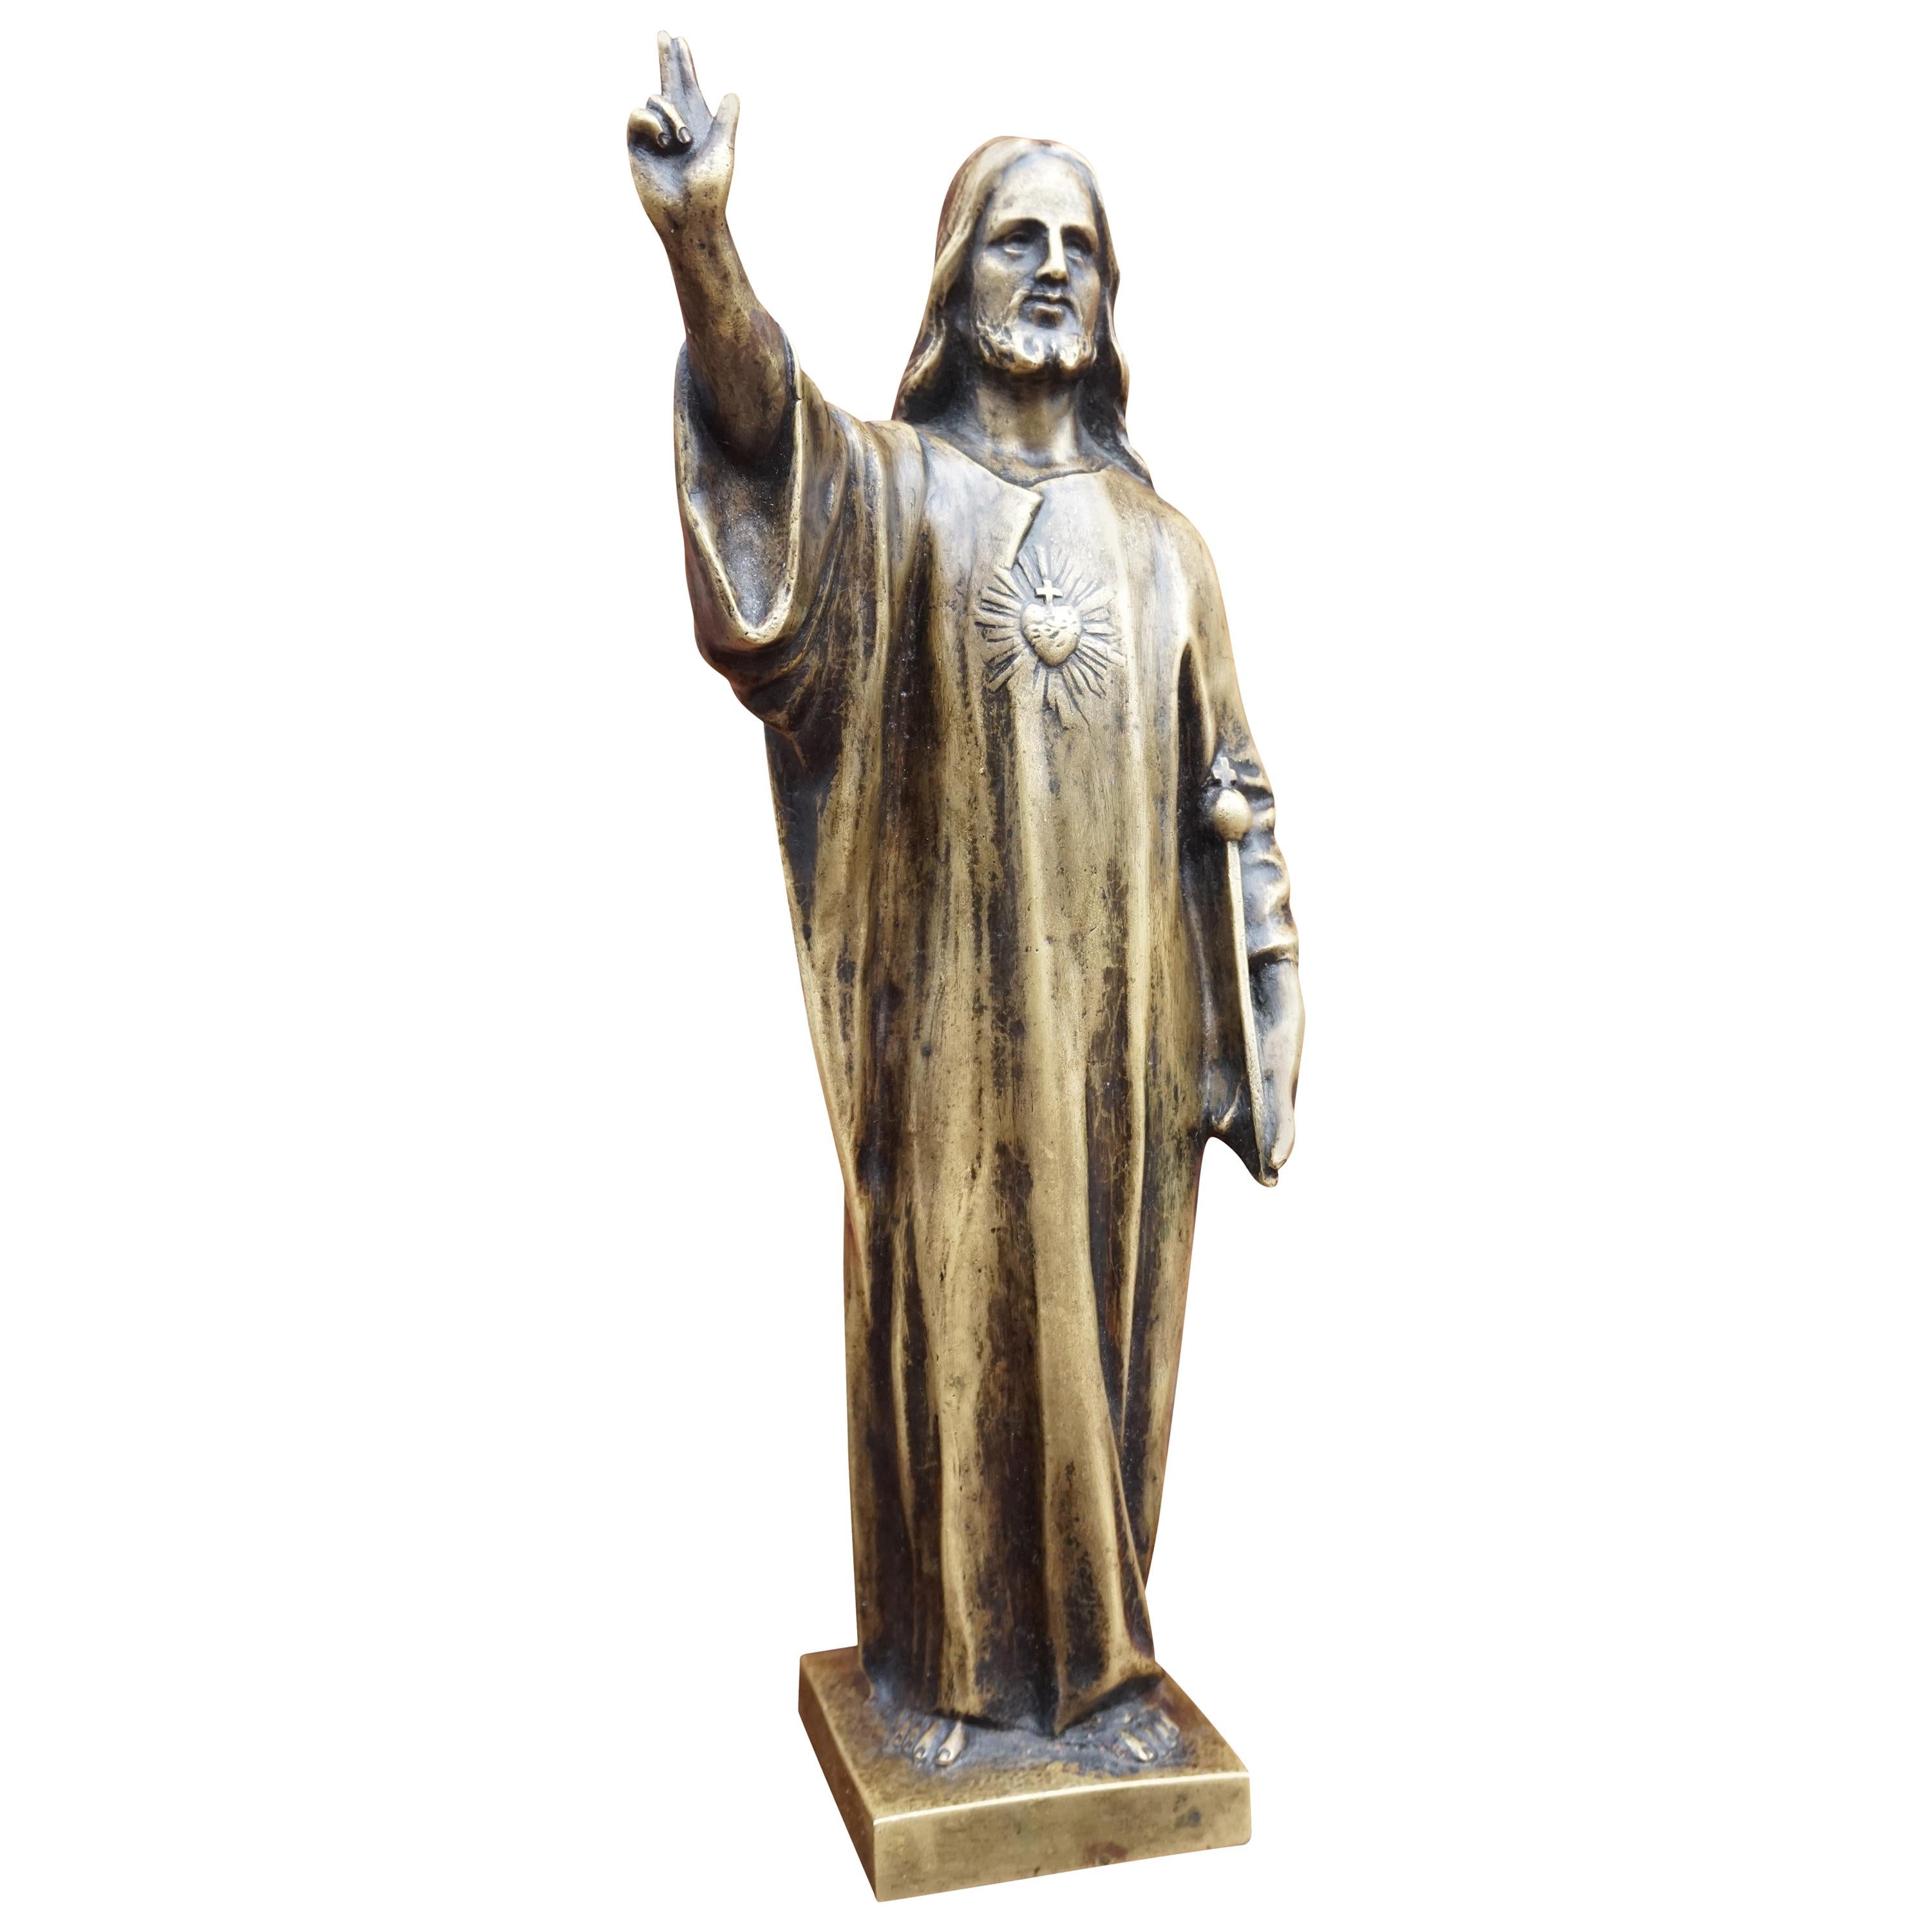 Antique Bronze Sacred Heart Sculpture / Statuette of Christ Holding a Scepter For Sale